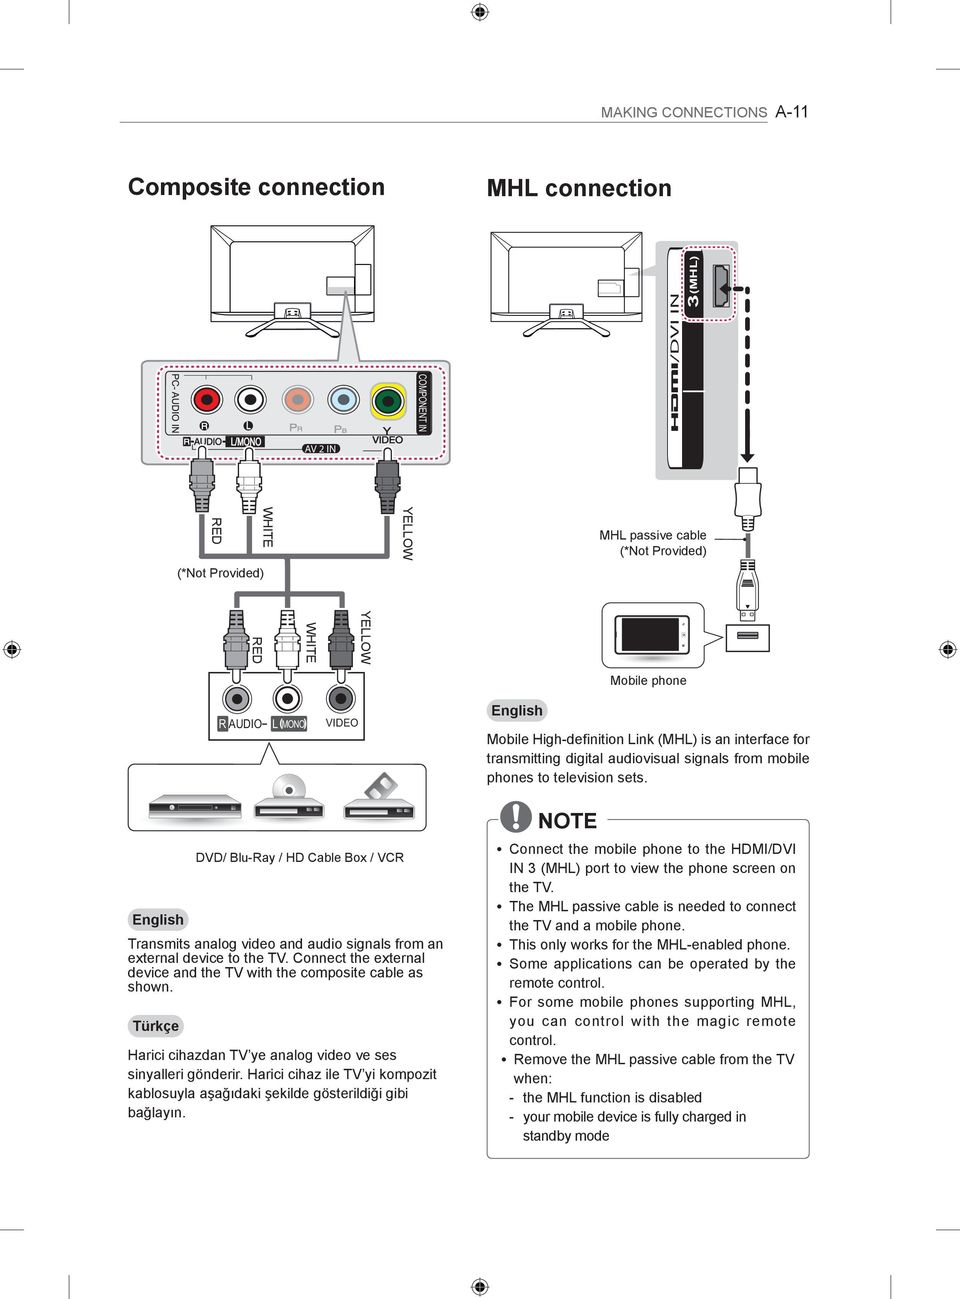 English DVD/ Blu-Ray / HD Cable Box / VCR Transmits analog video and audio signals from an external device to the TV. Connect the external device and the TV with the composite cable as shown.